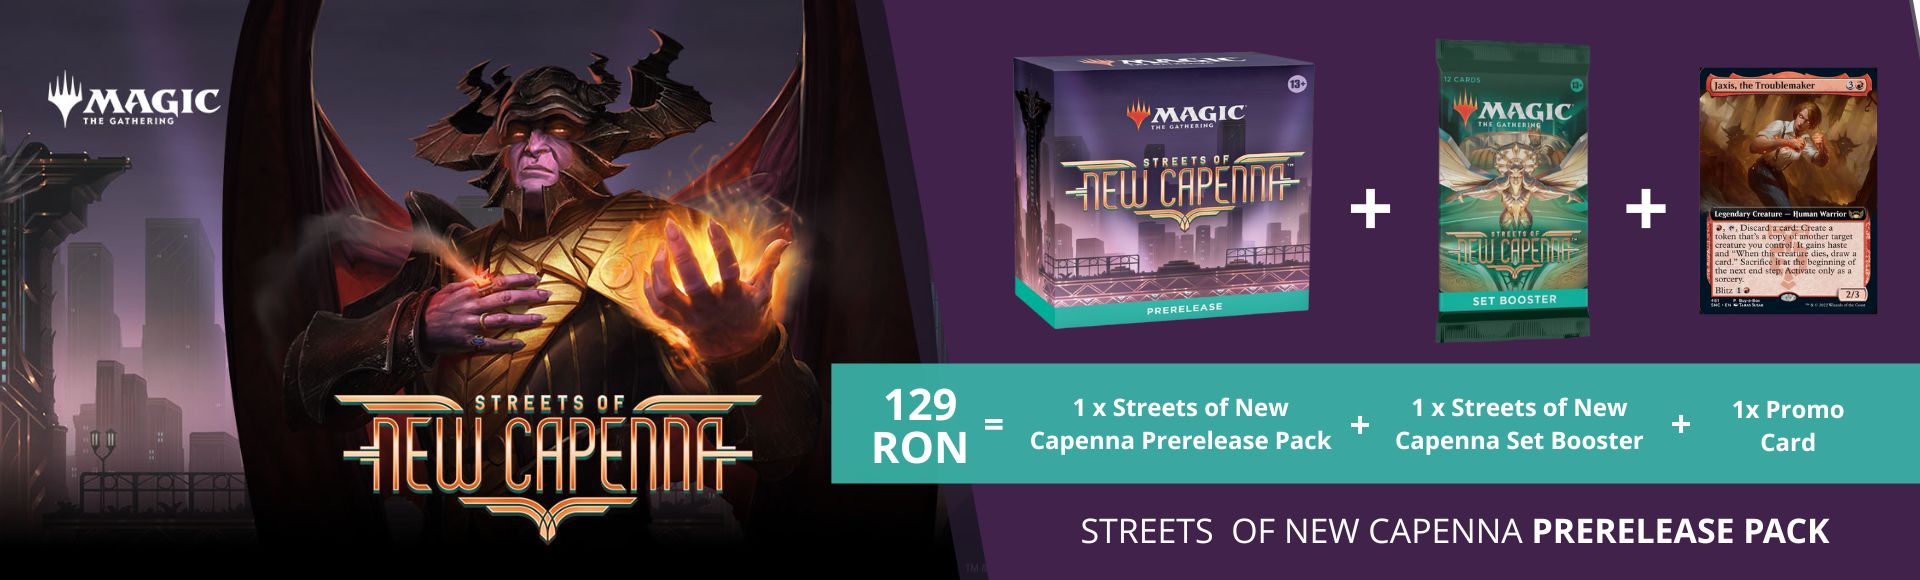 New Capenna Prerelease Pack